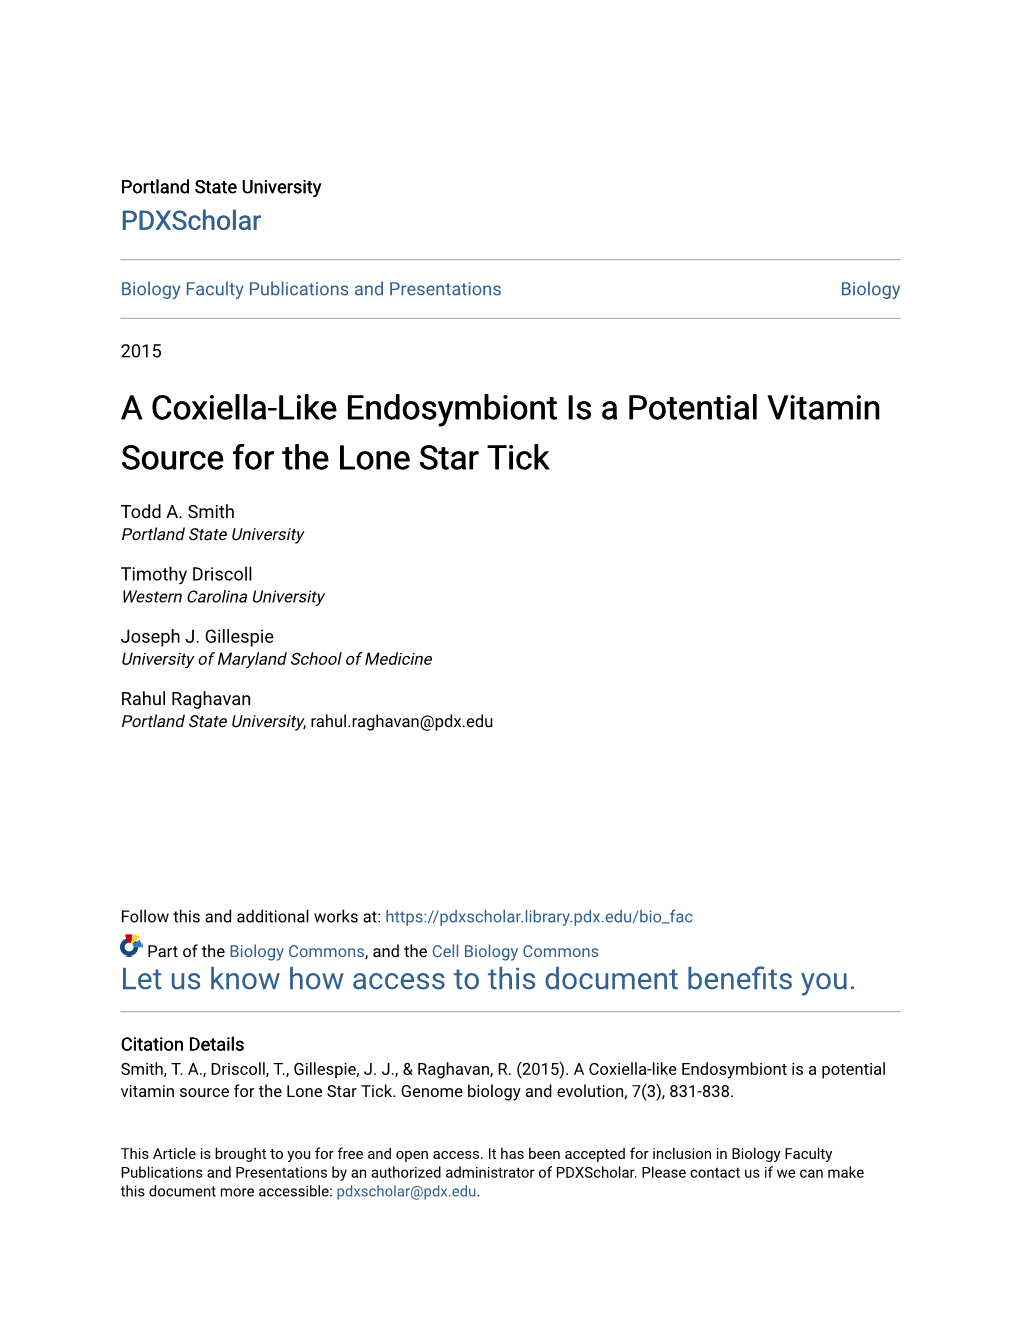 A Coxiella-Like Endosymbiont Is a Potential Vitamin Source for the Lone Star Tick